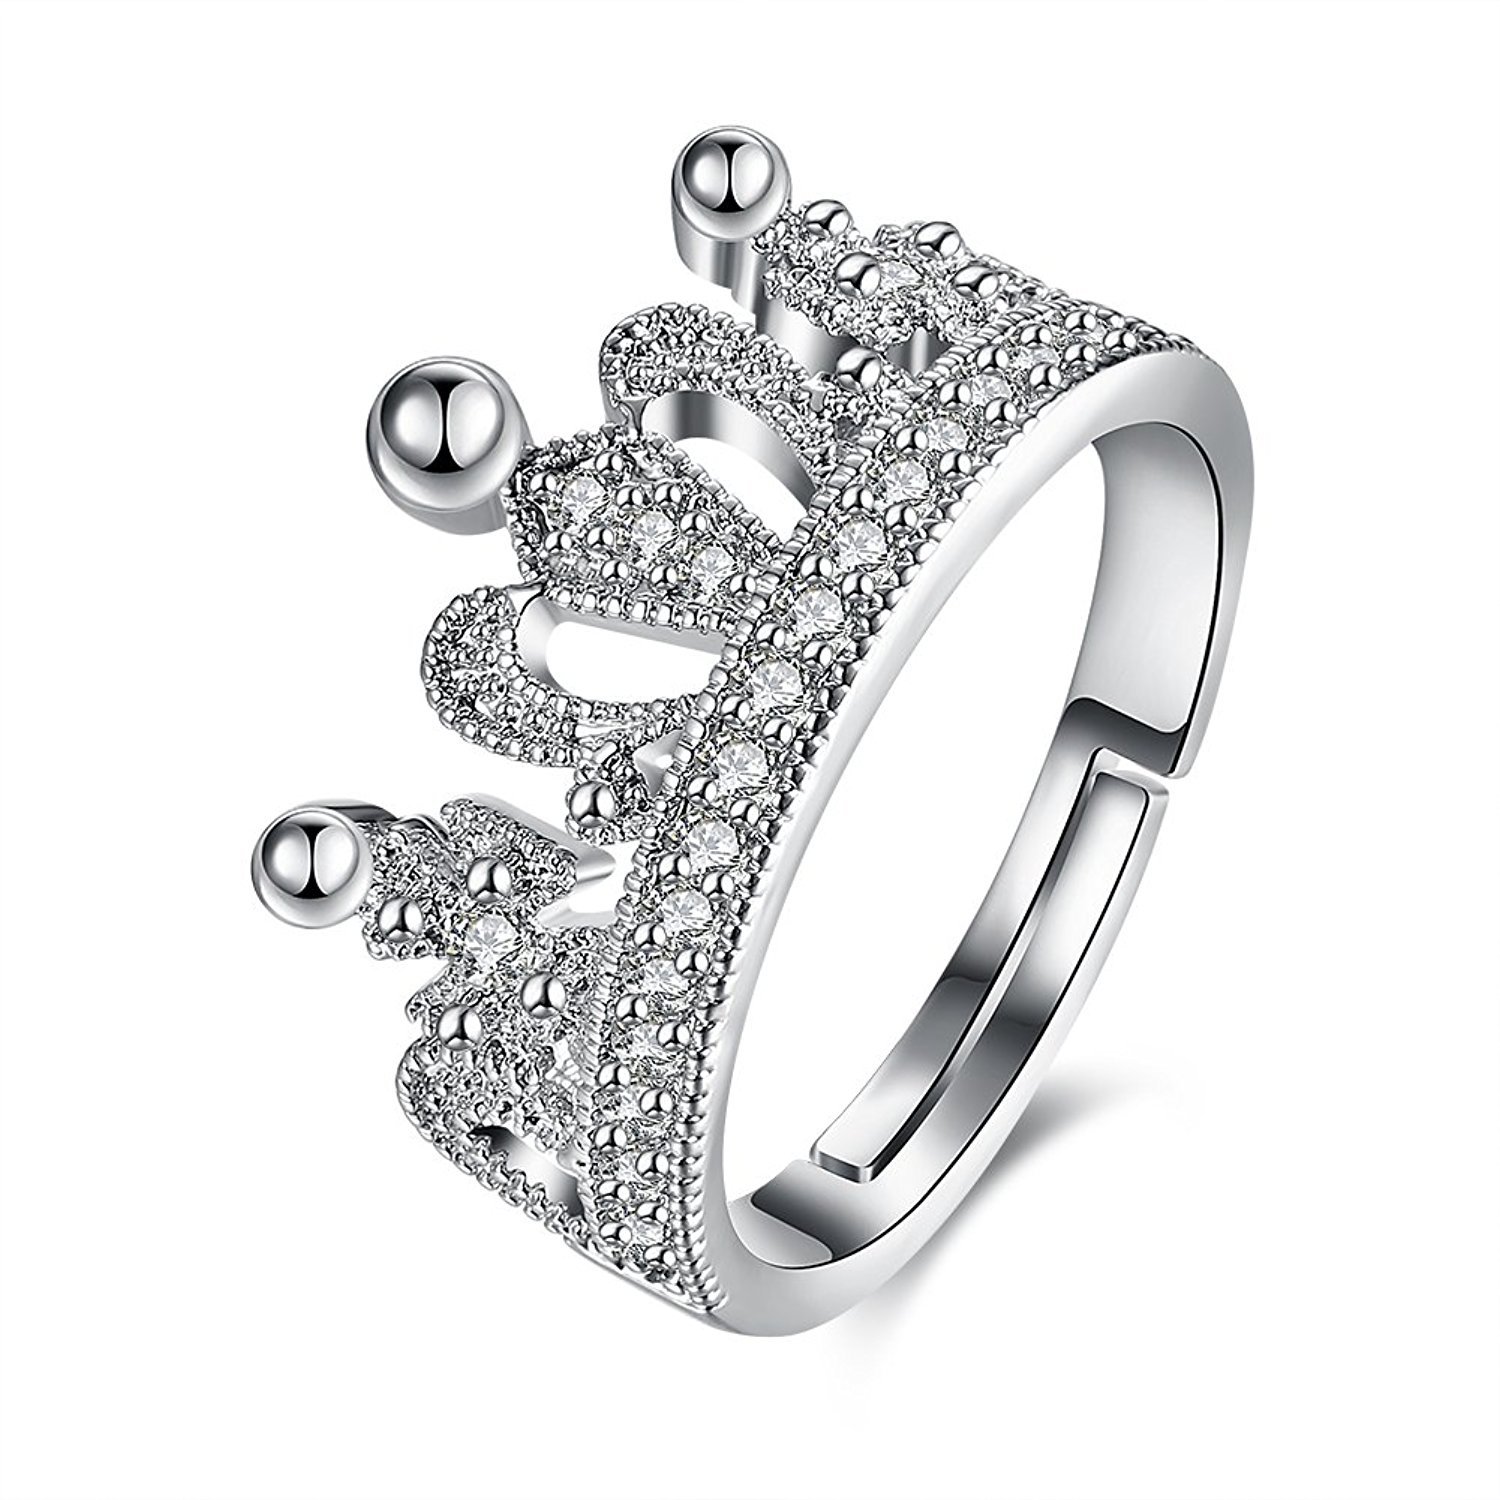 Lovely .925 Sterling Silver Round Diamond Princess Crown Proposal Ring For Women